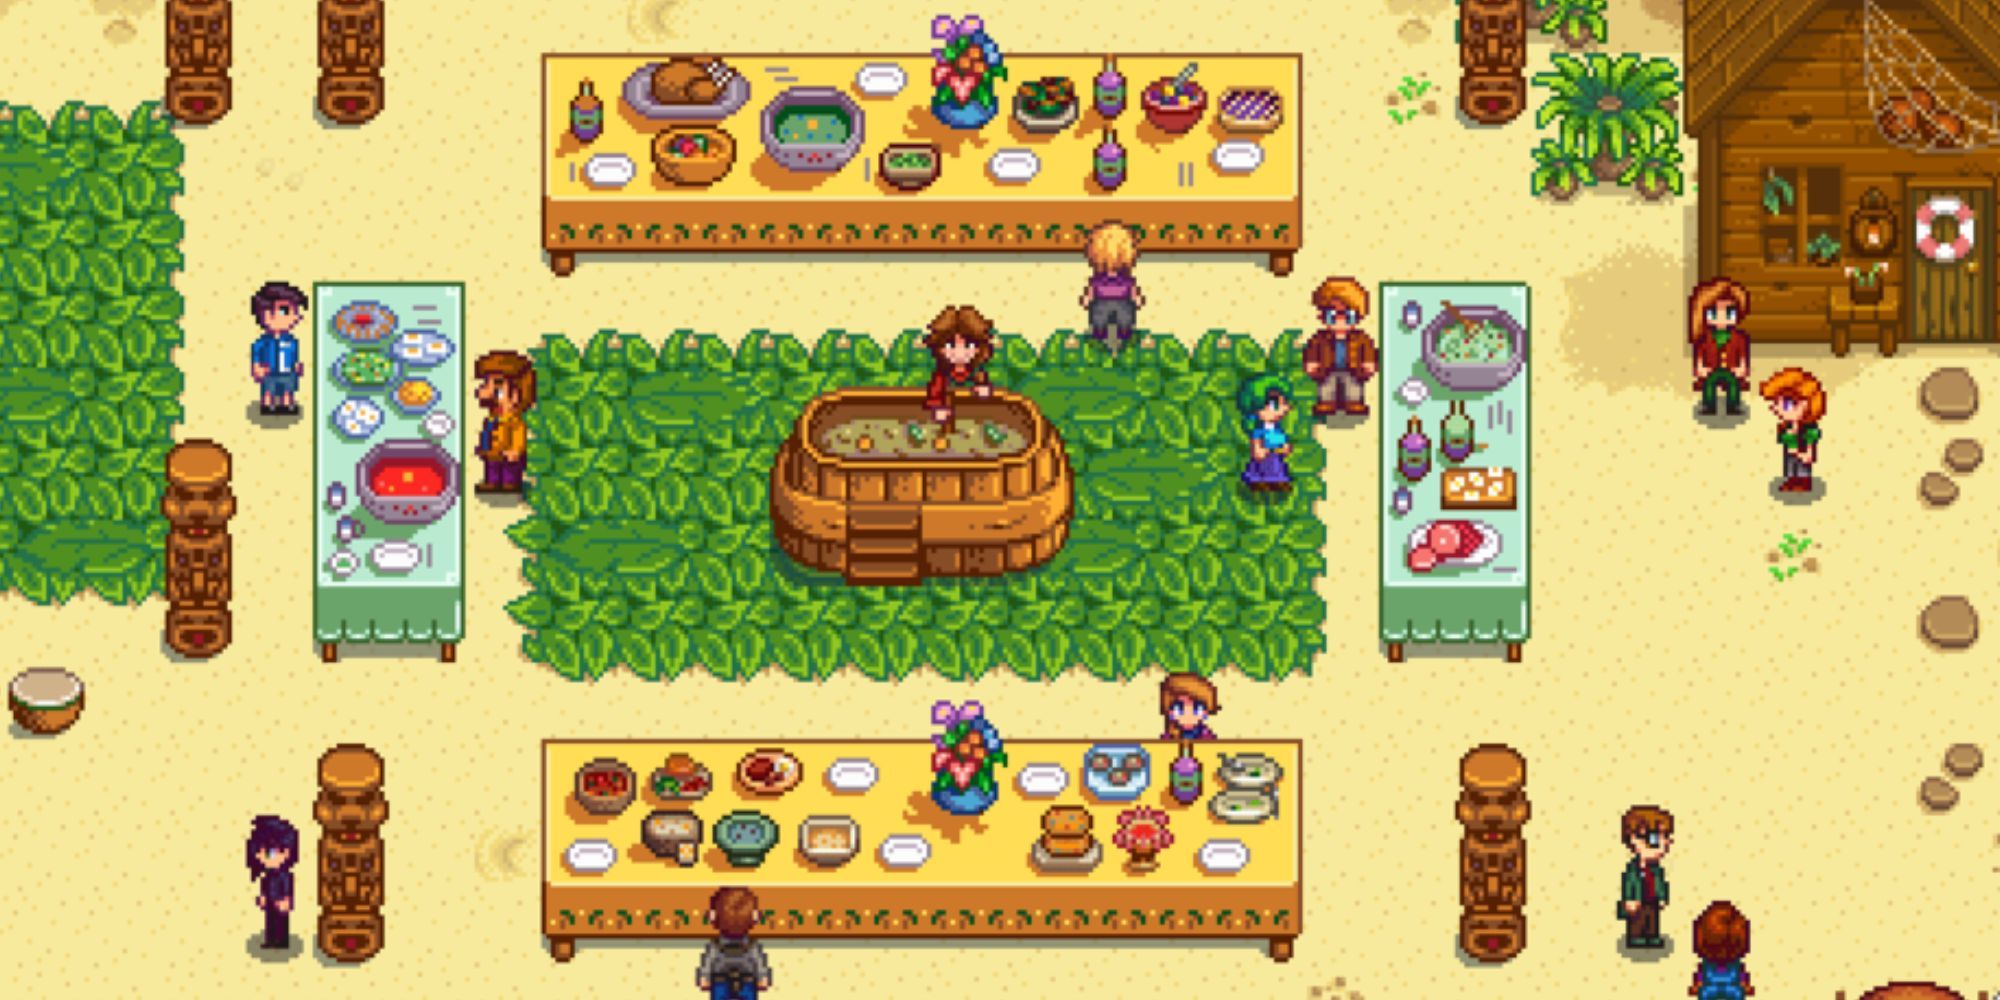 Stardew Valley many characters hanging out in a luau with soup